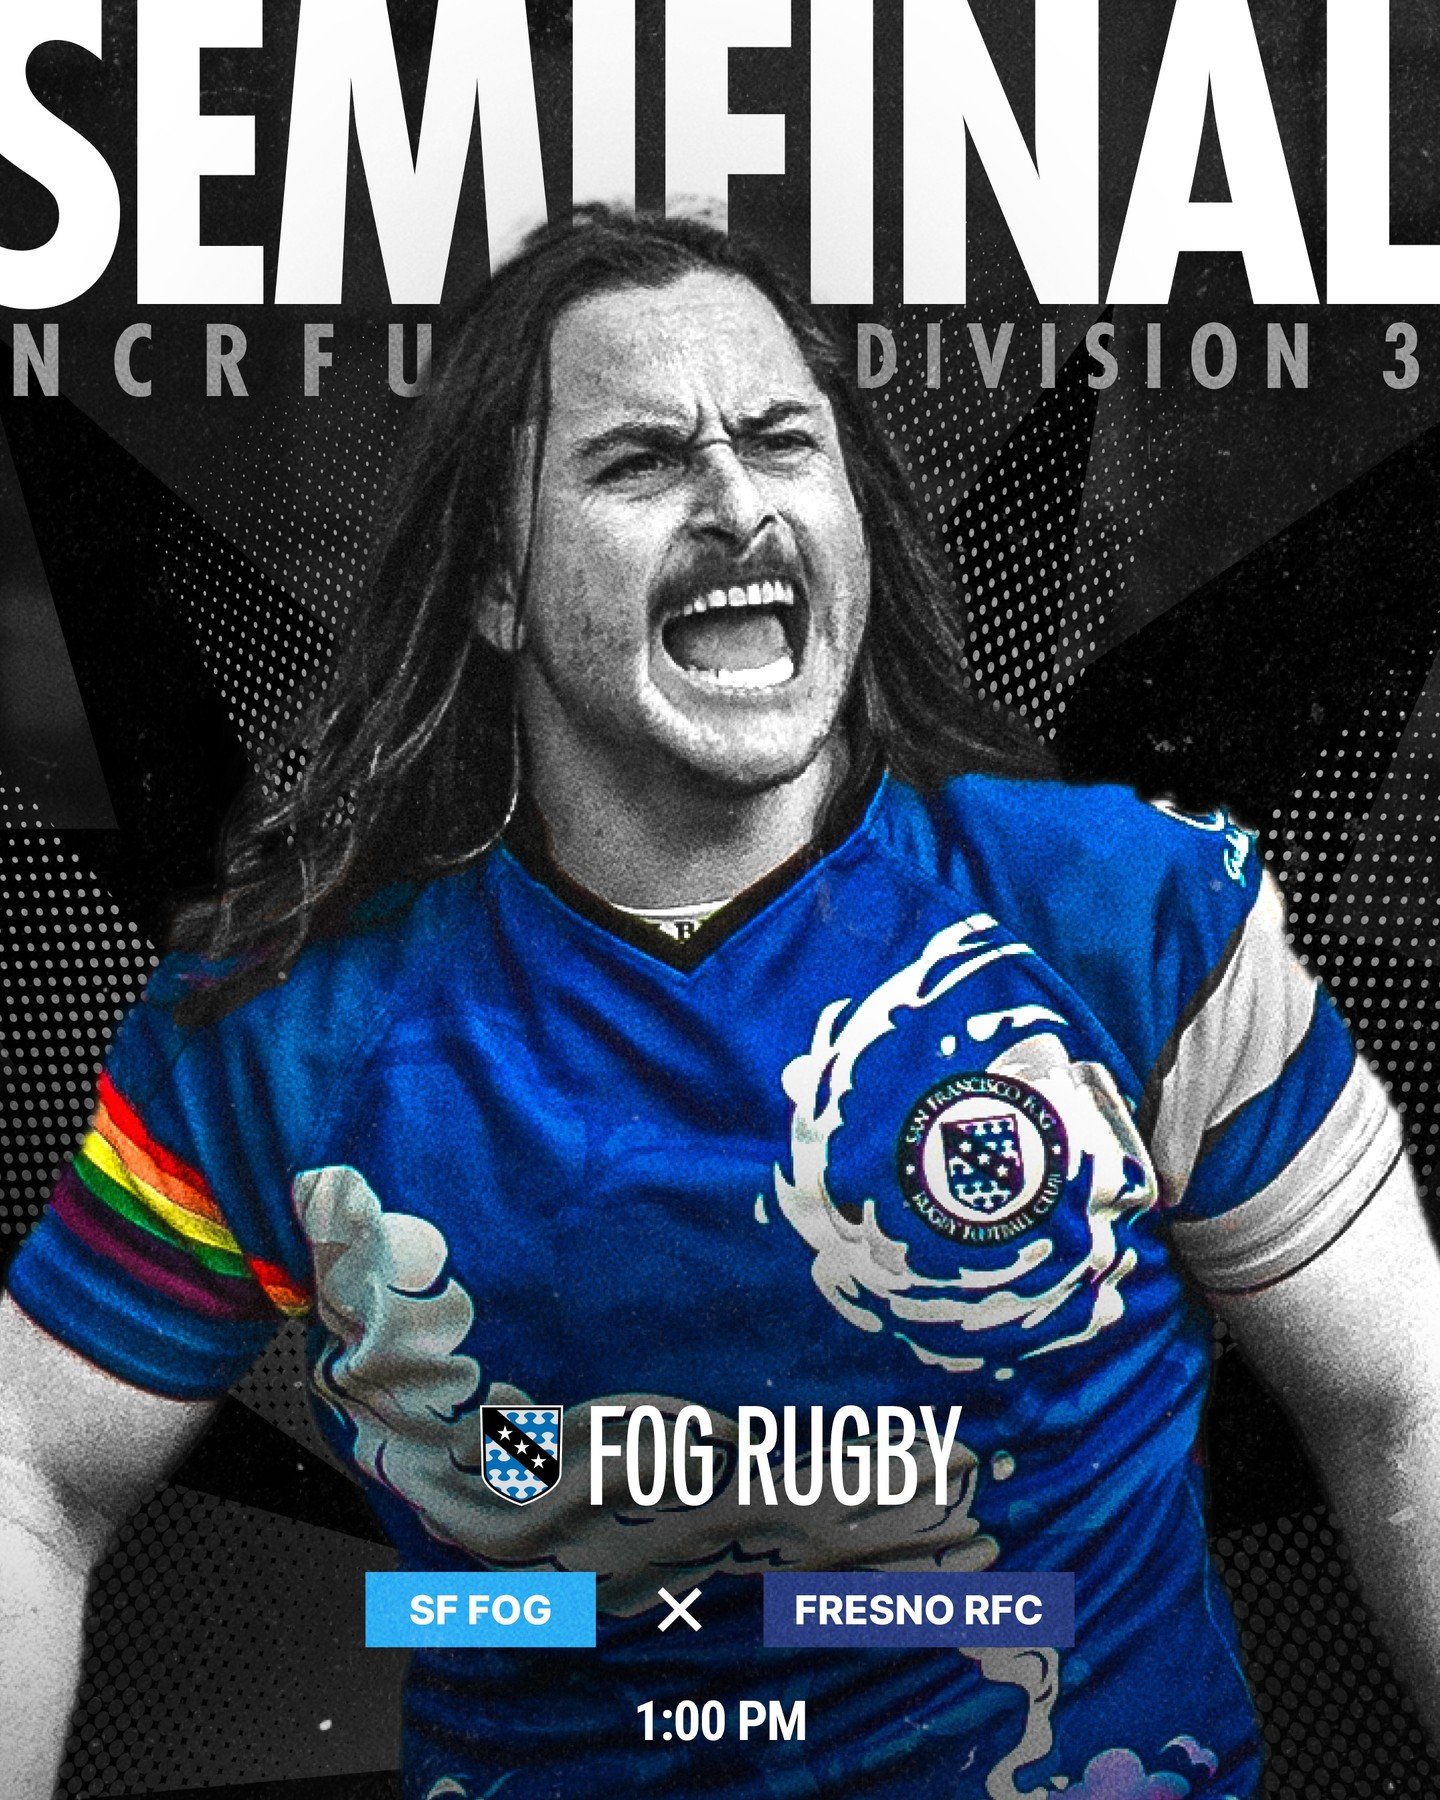 The Fog's rolling into Fresno this weekend for the NCRFU D3 Semifinals against Fresno RFC! LFG boys!! Should be a nice little warmup before Bingham 😎 #ROLLFOGROLL! 

Kickoff is tomorrow, May 4th, at 1pm in Fresno at 6522 N West Ave, CA 93720. 

#fog